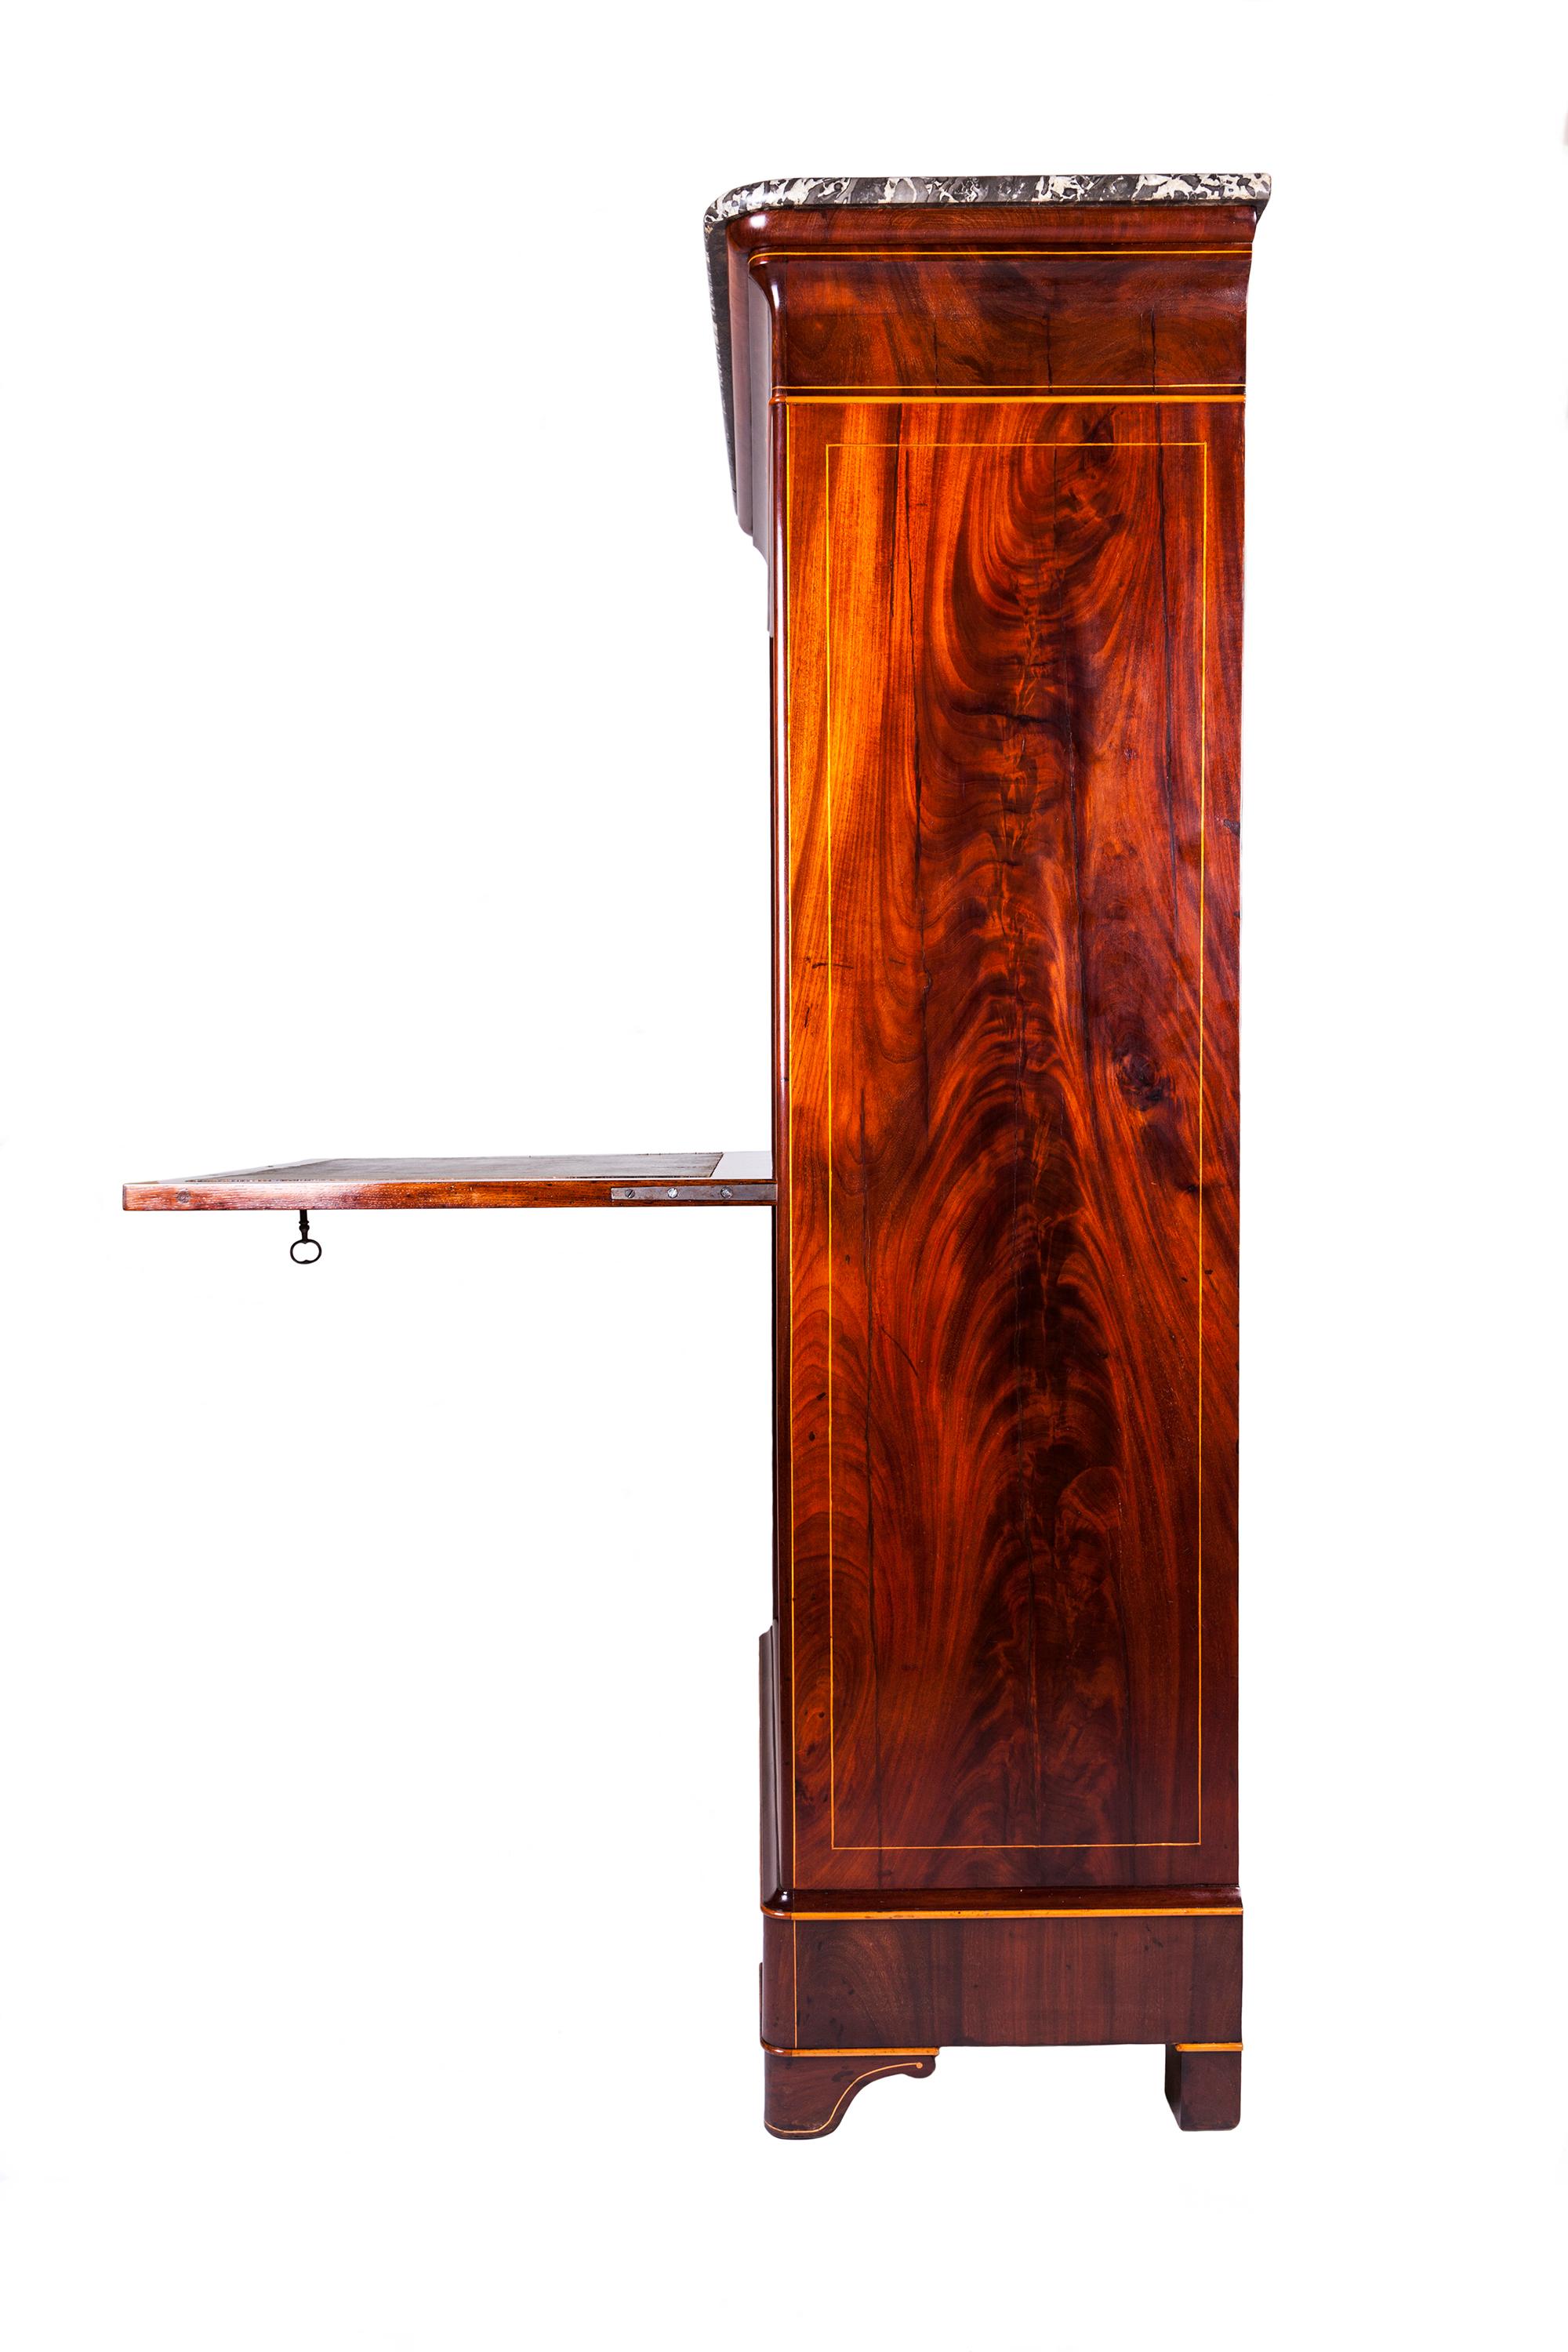 Rare secrétaire à abattant Carlo X, in flamed mahogany wood, finely inlaid in light wood with palmette and lyre motifs in the typical taste of Carlo X style. Calatoia is covered with a beautiful original printed leather. Locks and keys are